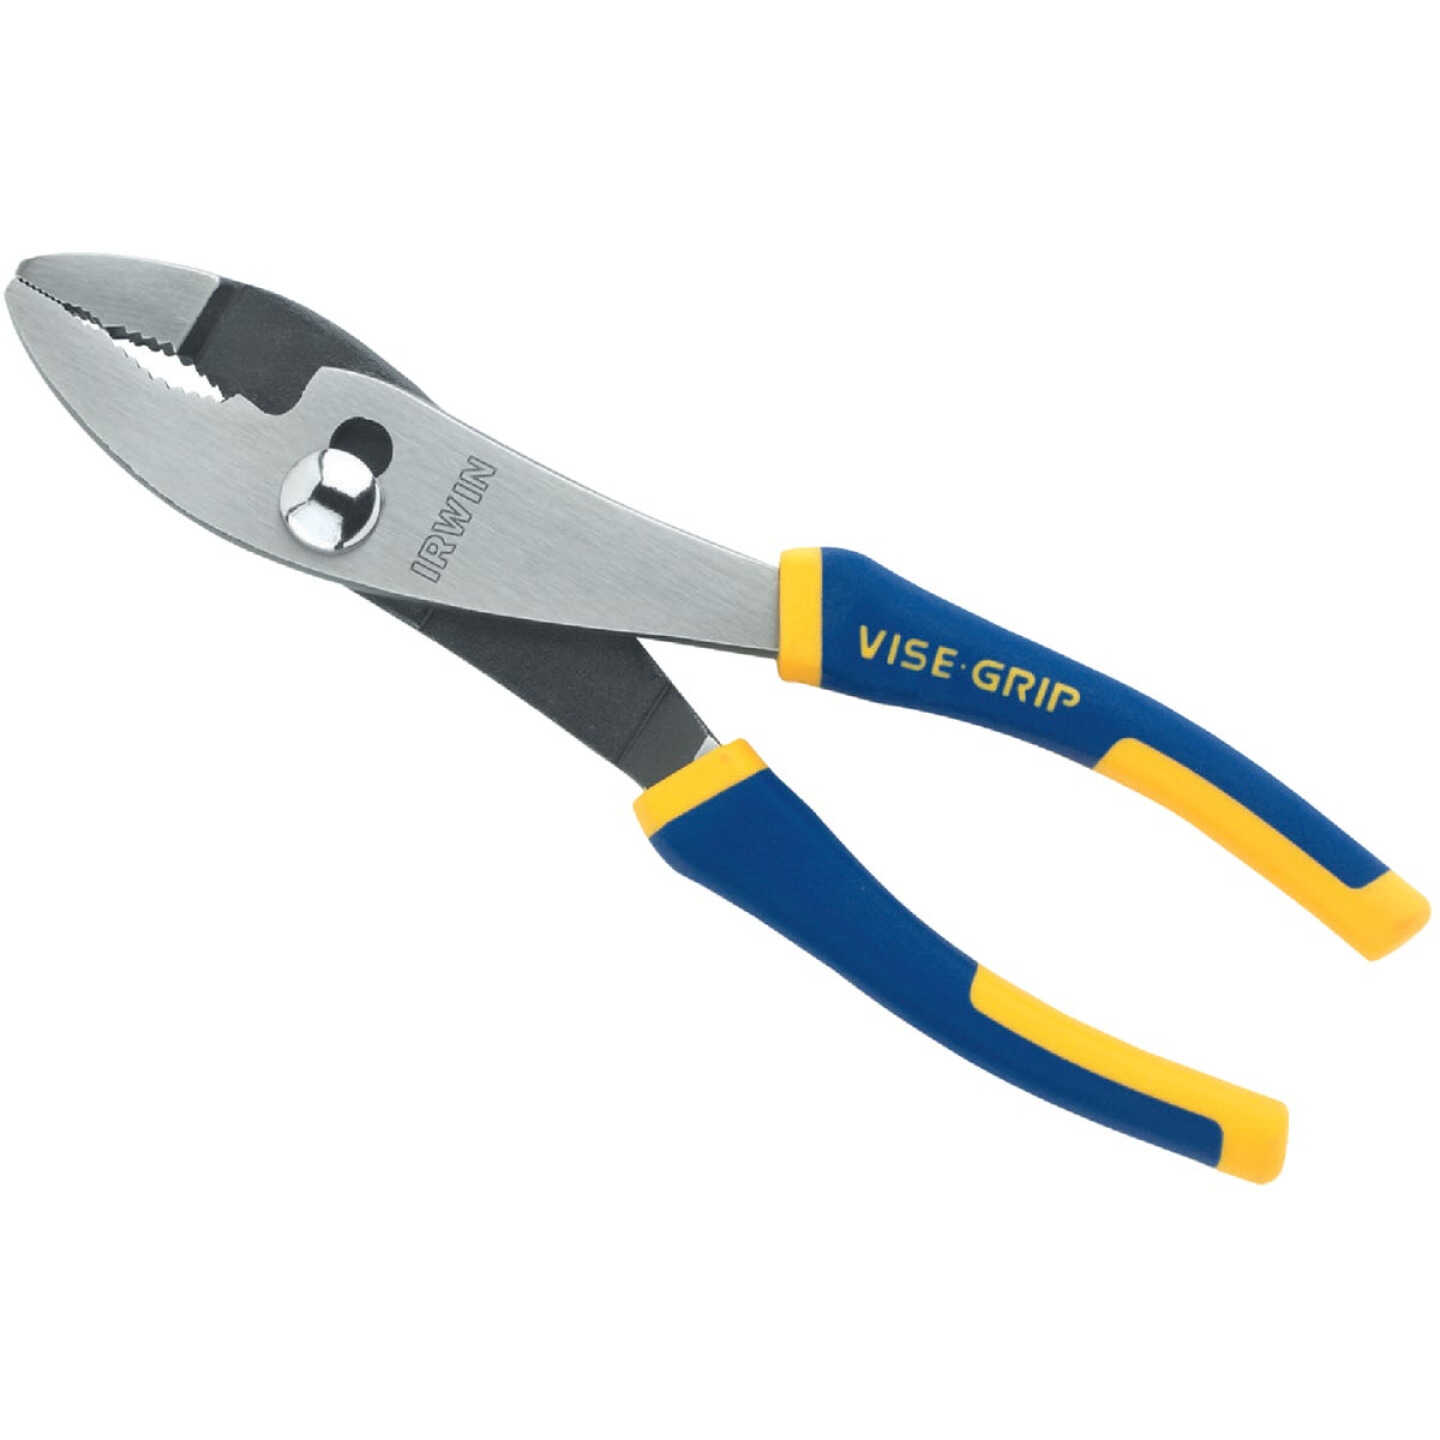 Vise-Grip Slip Joint Pliers with Wire Cutter - Model 20784-06 Comfort Grip 1? Capacity 6? Long